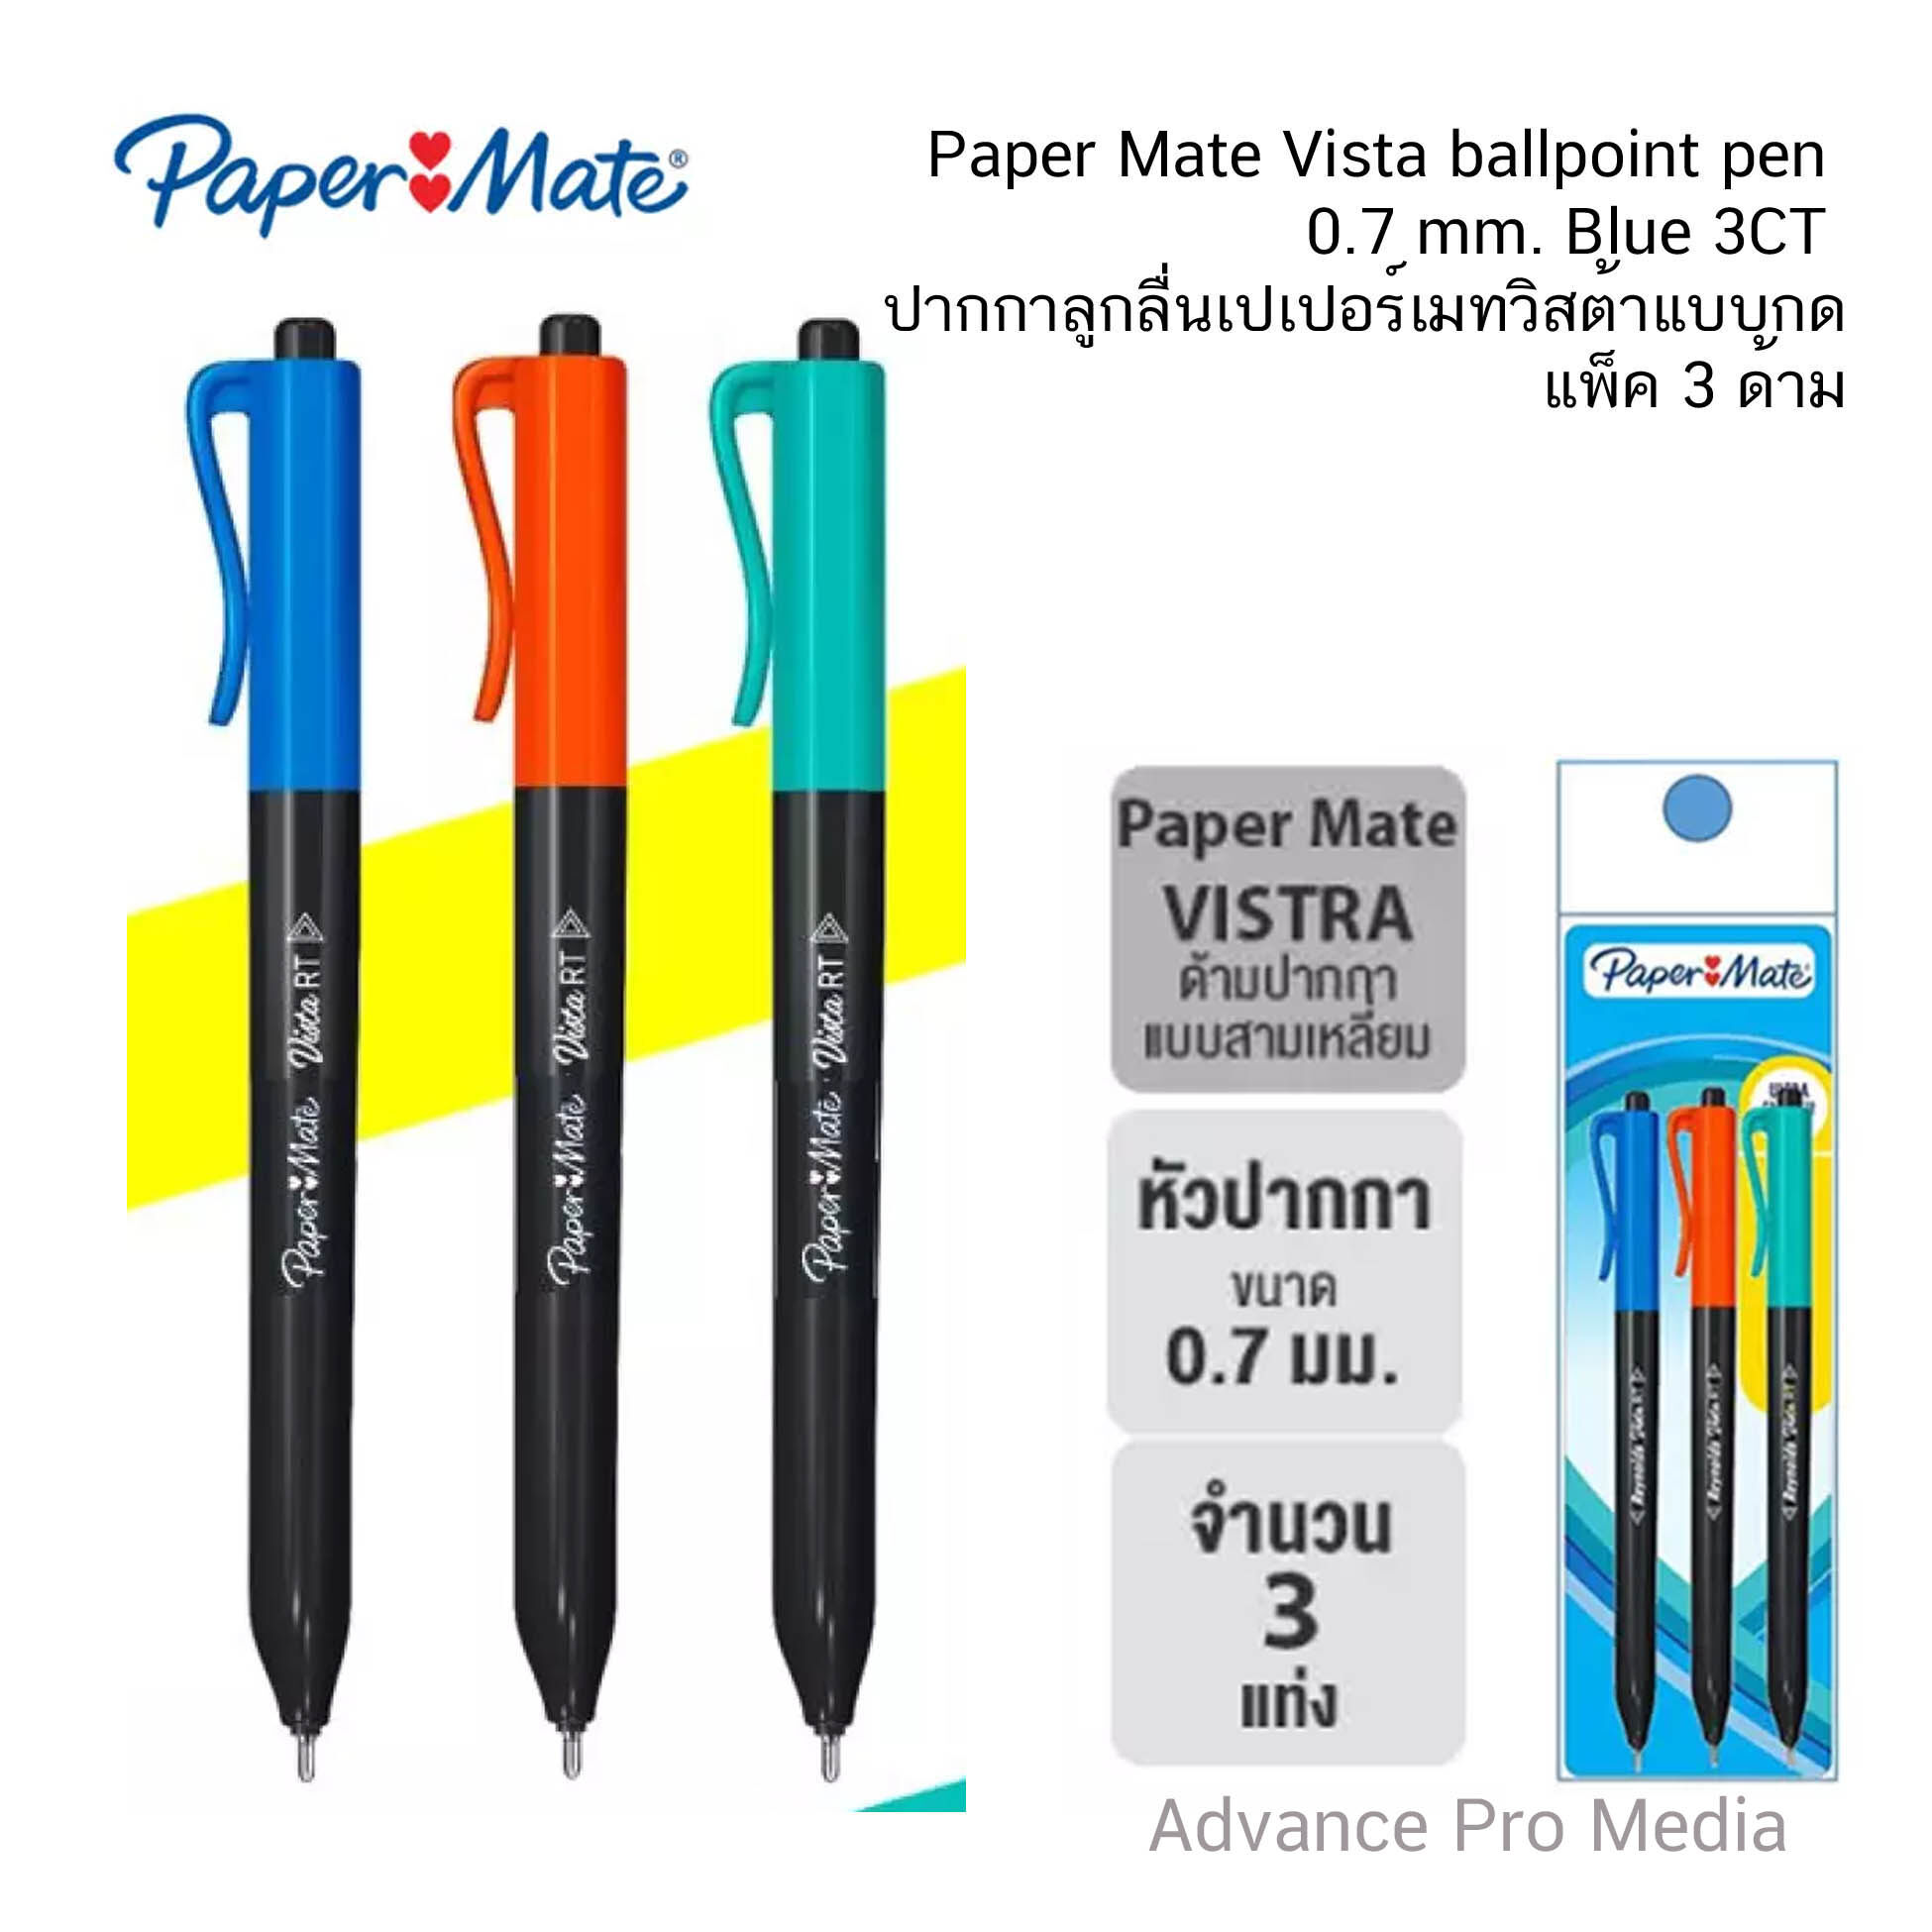 Paper Mate InkJoy Gel Pens Medium Point (0.7mm) Capped, 14 Count, Assorted  Colors